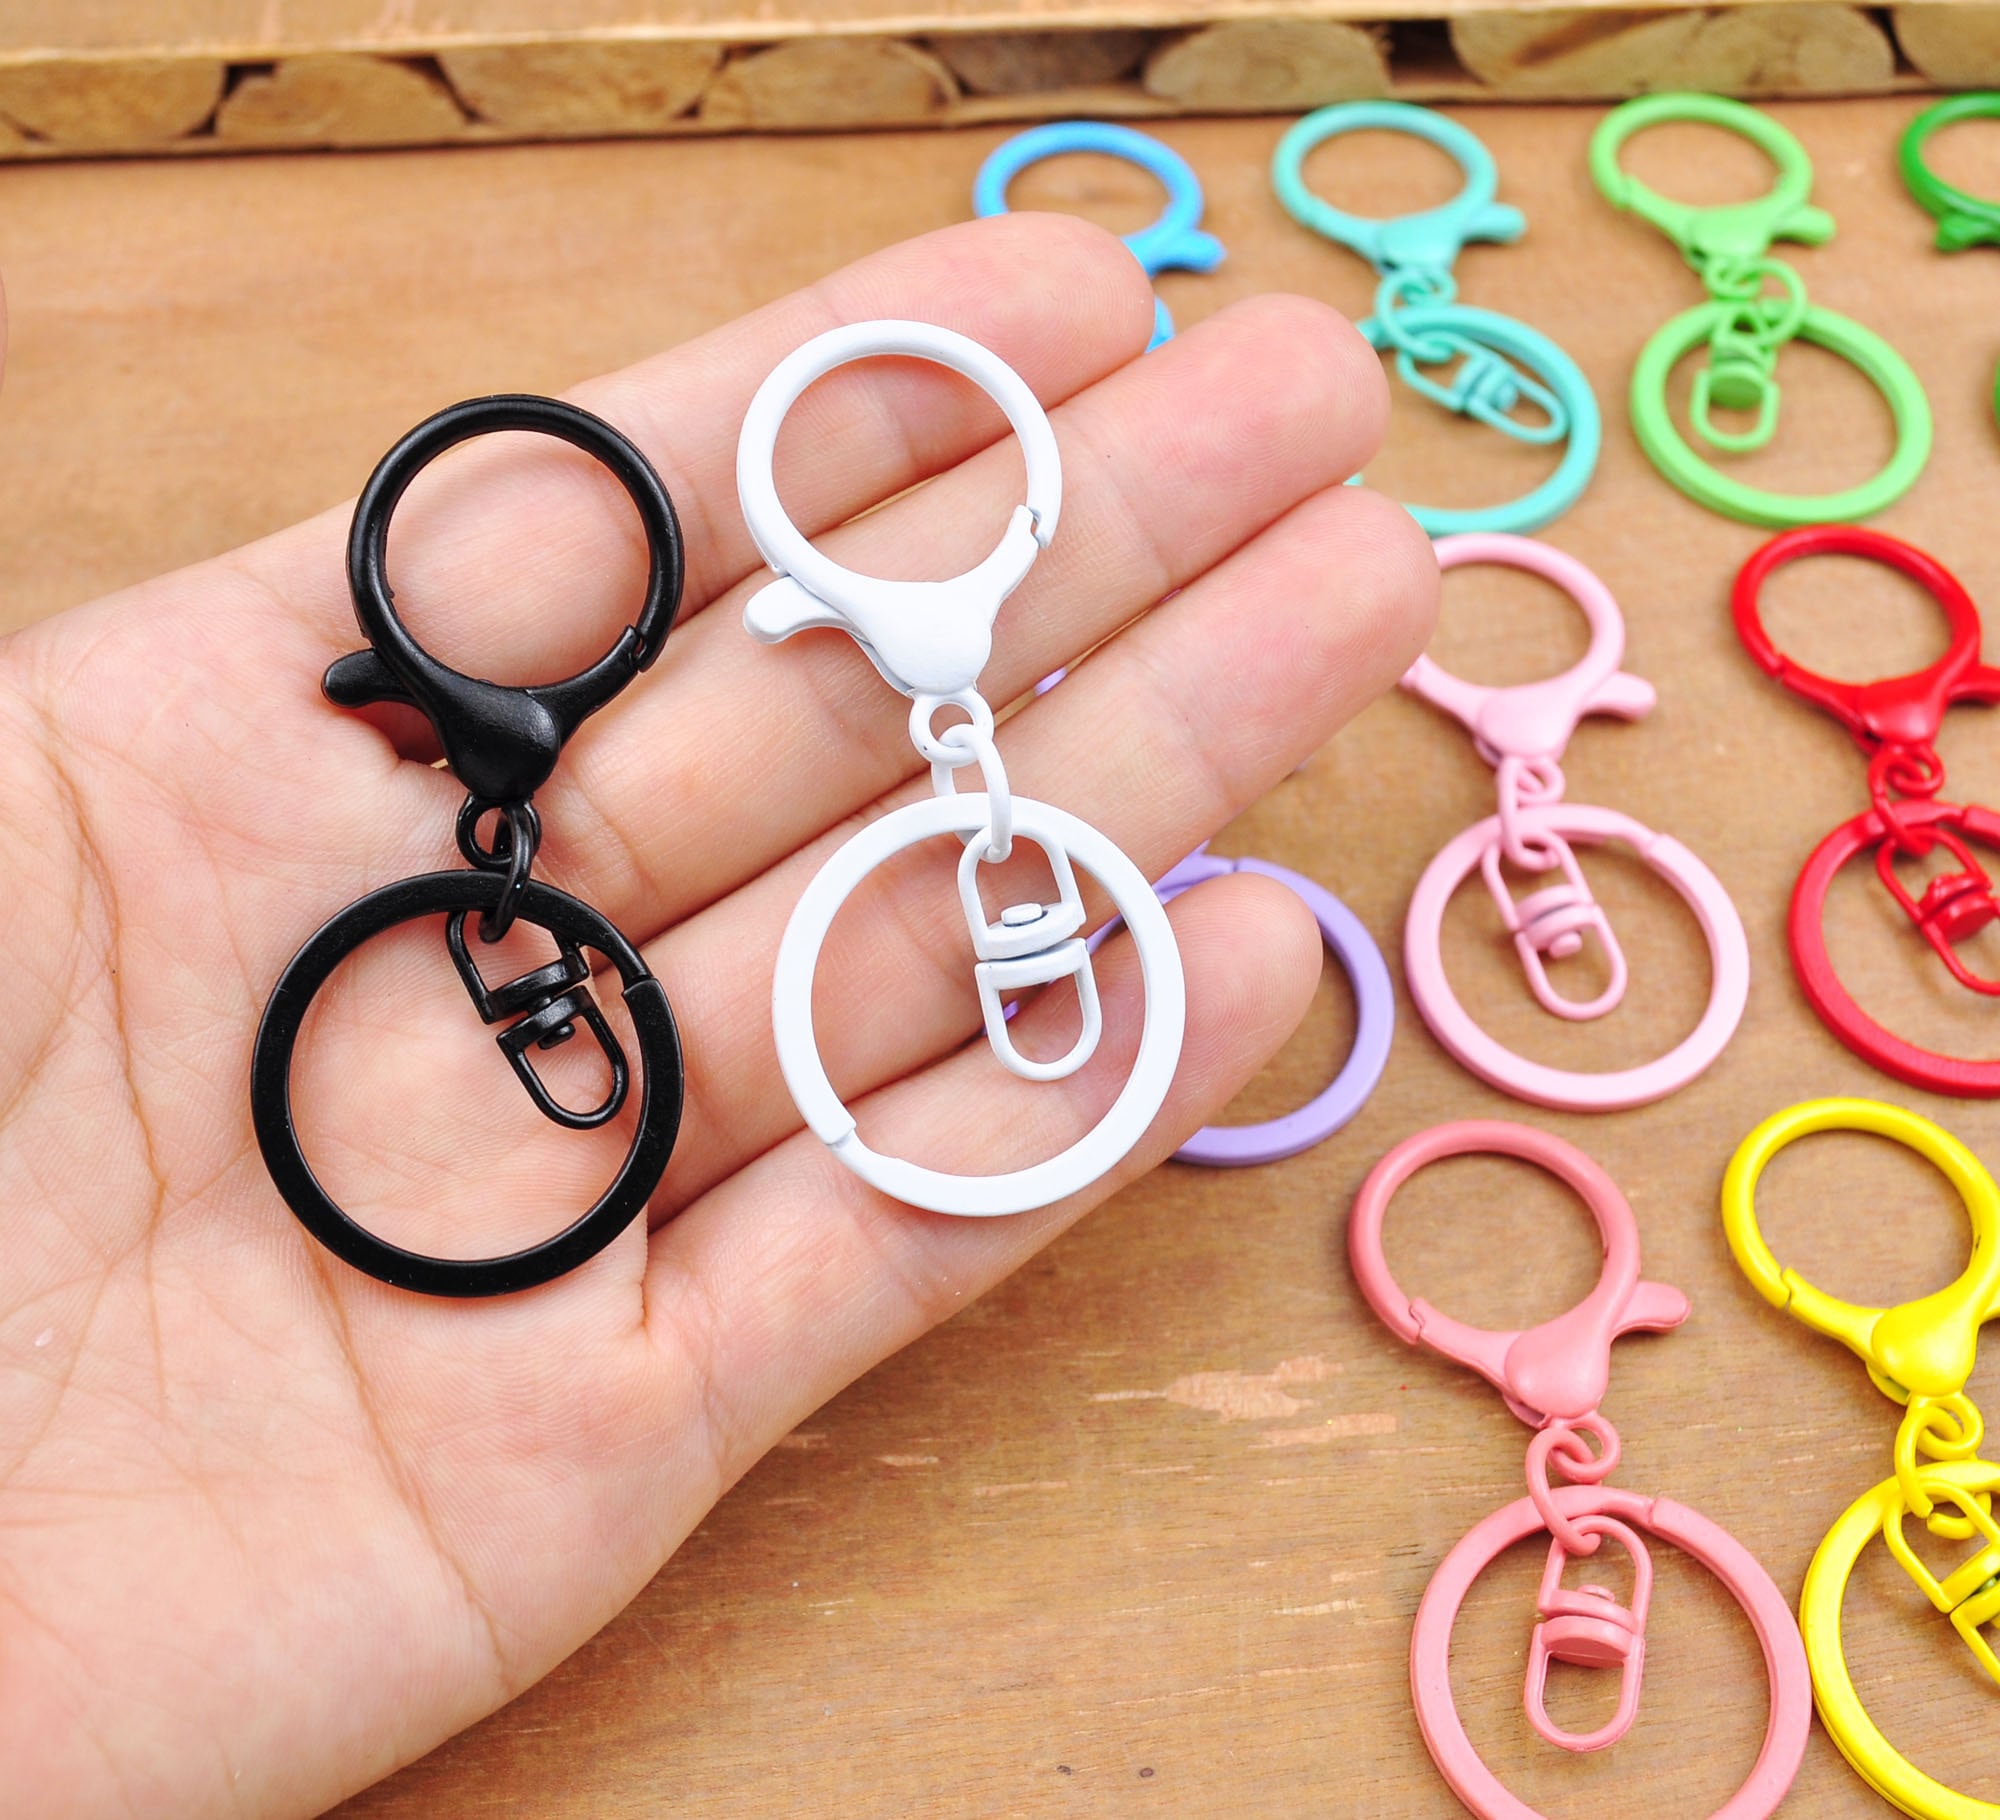 6PCS Colorful Key Chain Ring Metal Lobster Clasp Clips Bag Car Keychain  DIYJewelry Accessories Key Hooks Hook Up Base